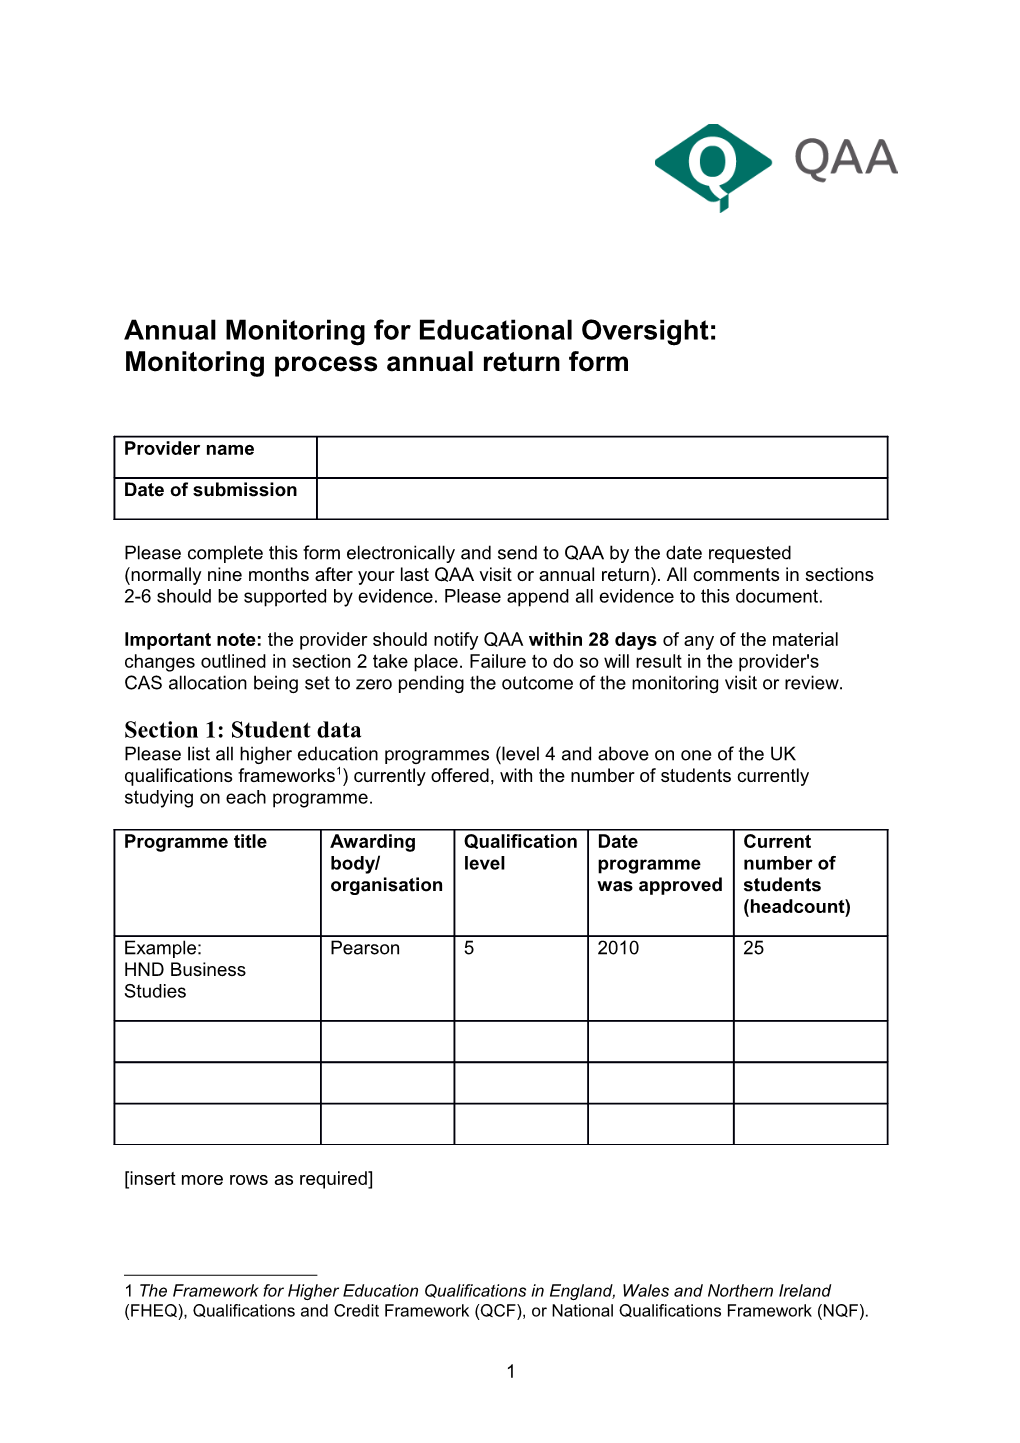 Educational Oversight: Annual Monitoring Return Form